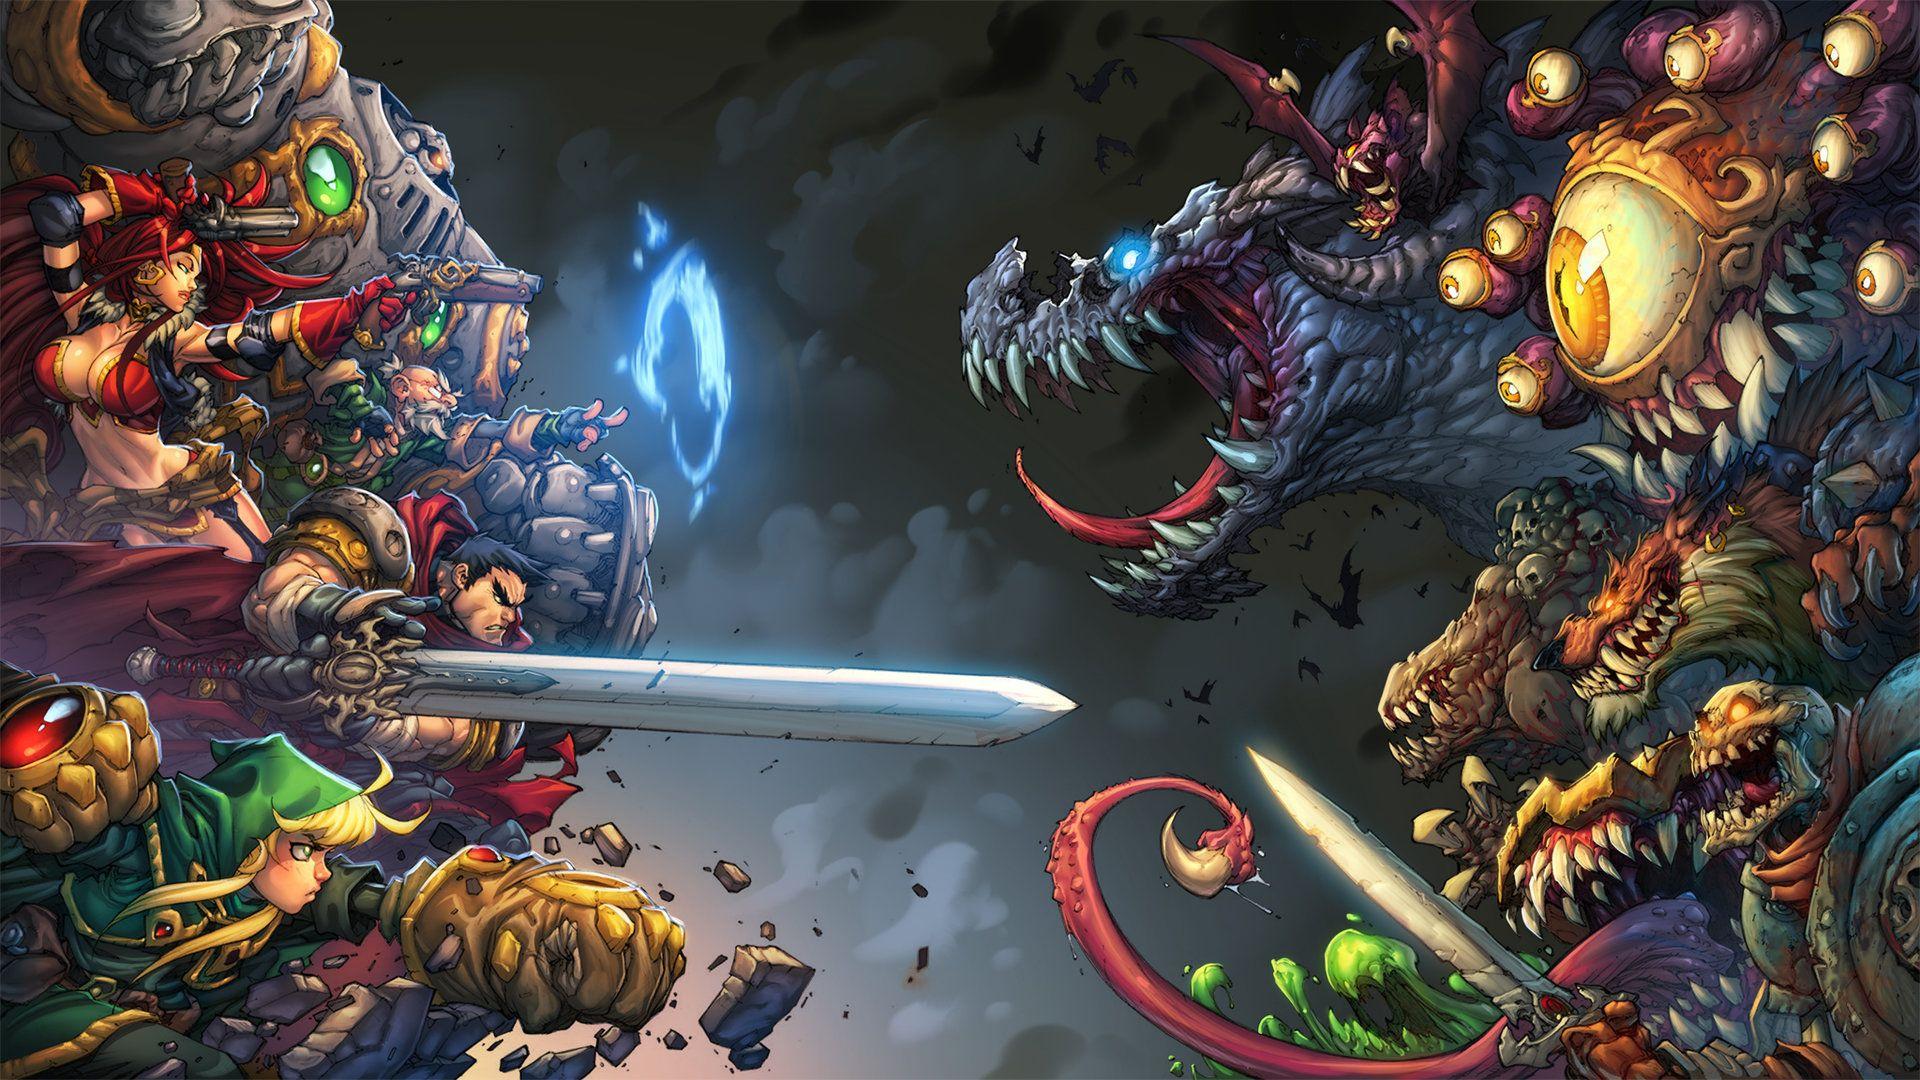 Battle Chasers Wallpapers